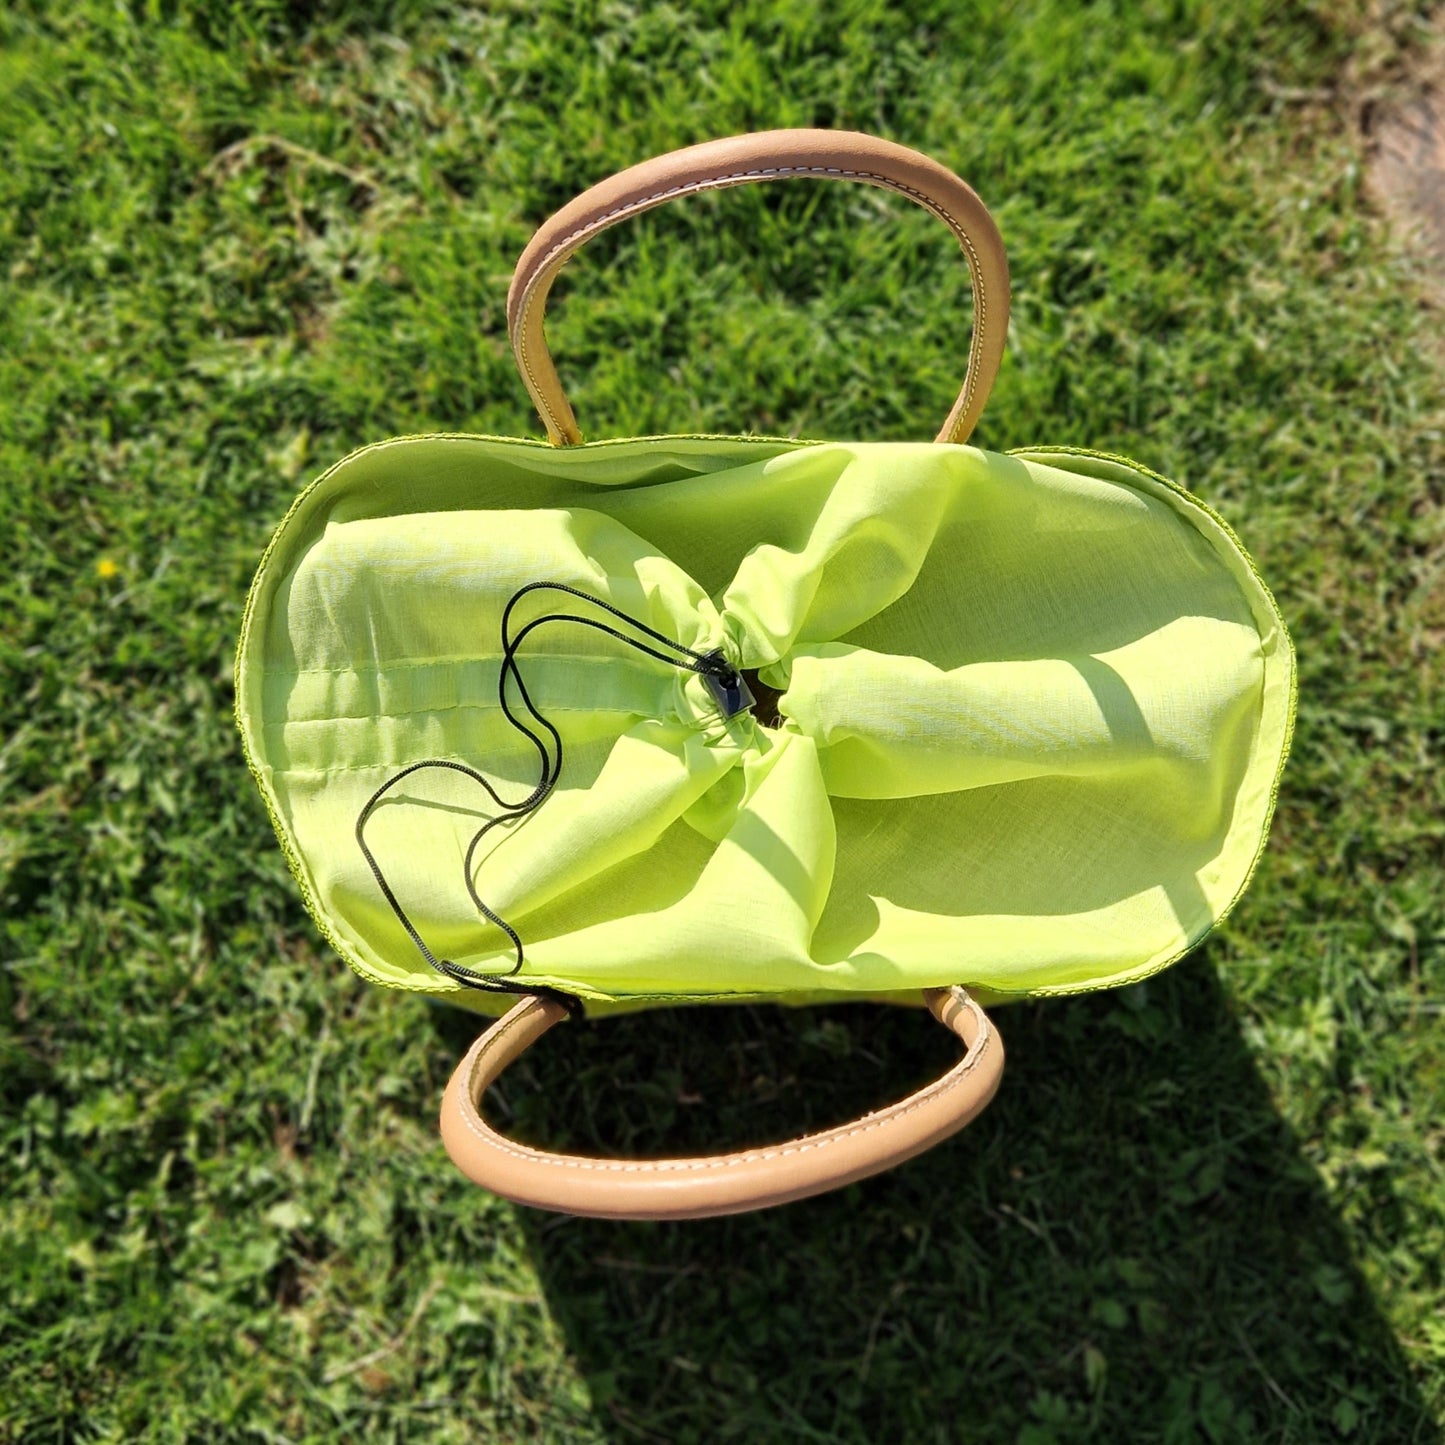 Lime green raffia basket showing the drawstring top closed.